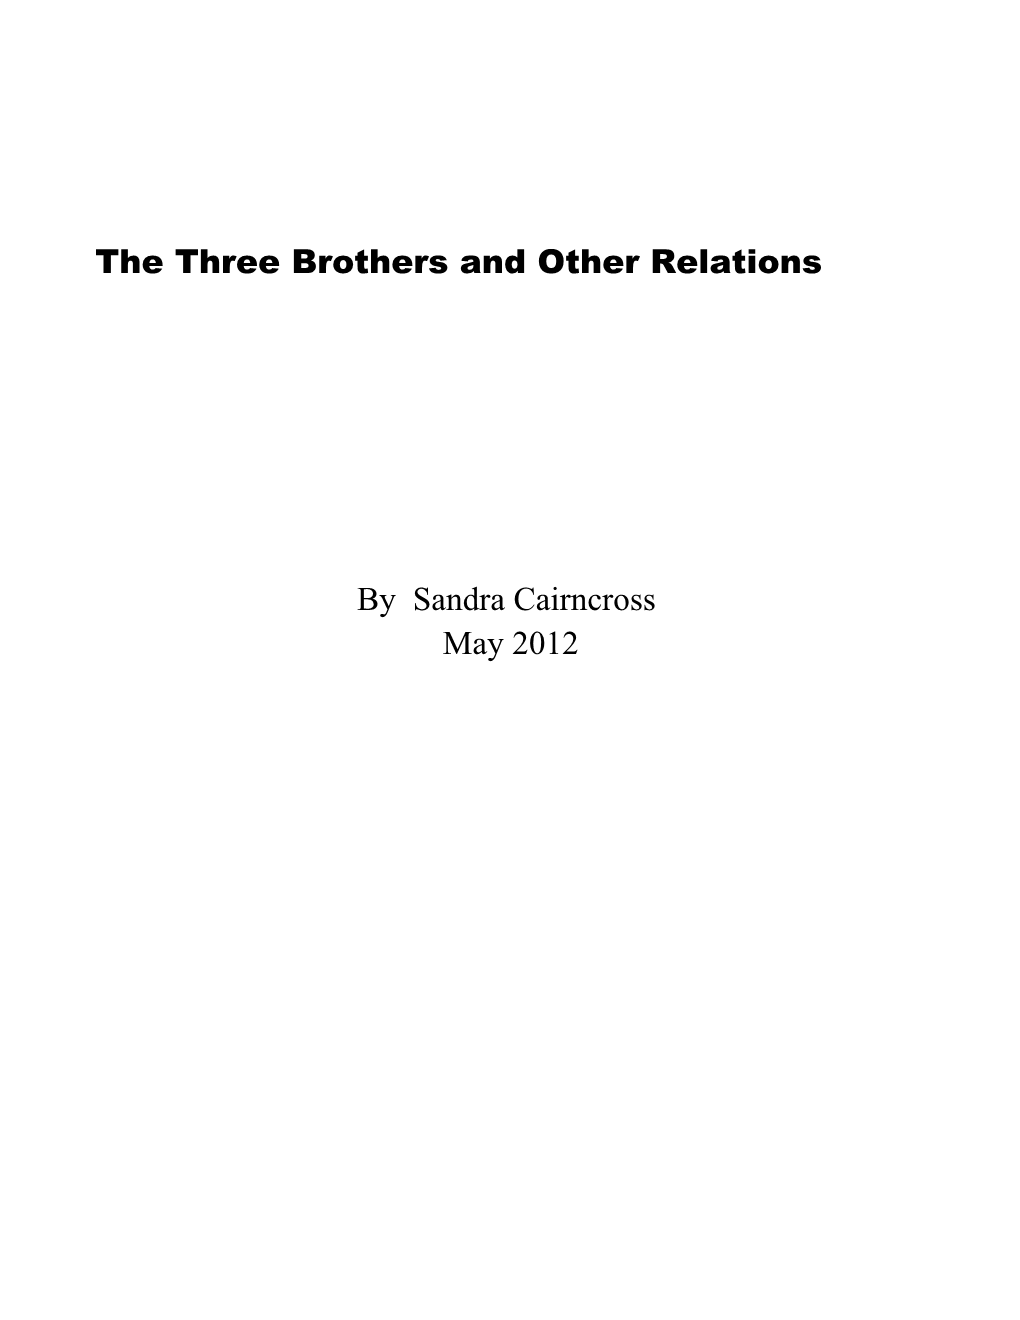 The Three Brothers and Other Relations